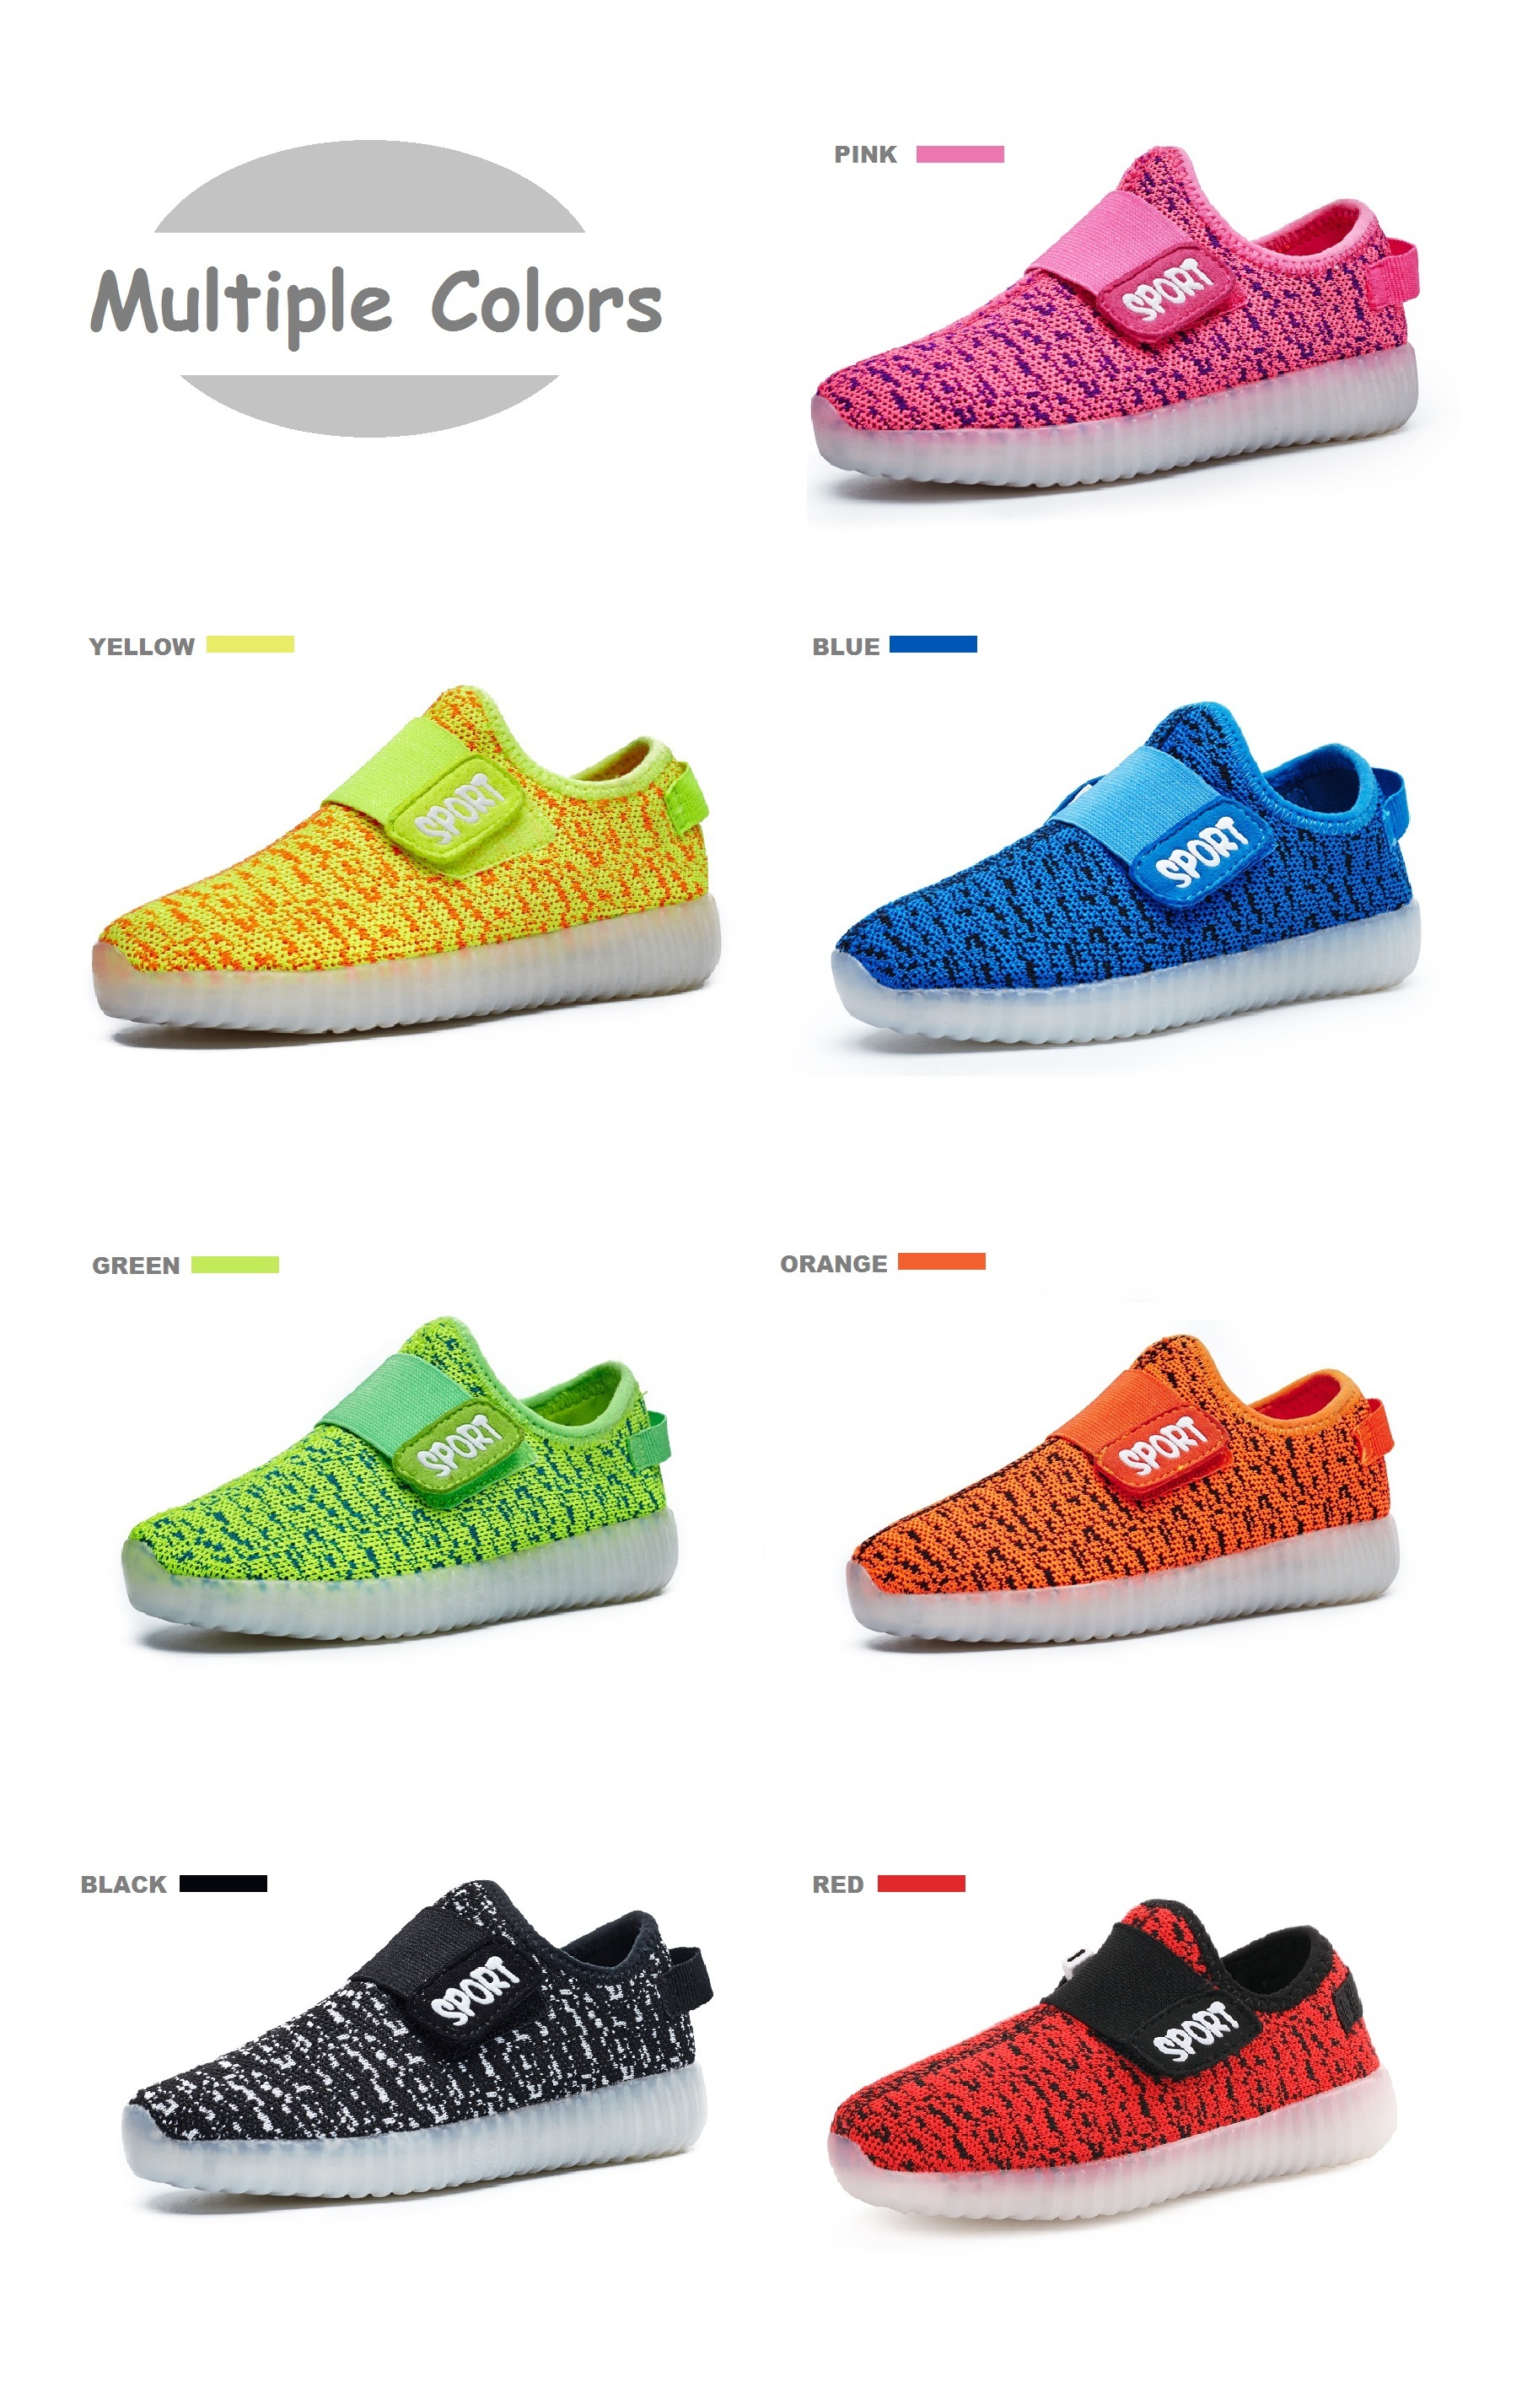 KIDS-USB-LED-Luminous-Light-Weight-Sneakers-Light-Up-Shoes-Colorful-Flash-Shoes-1204003